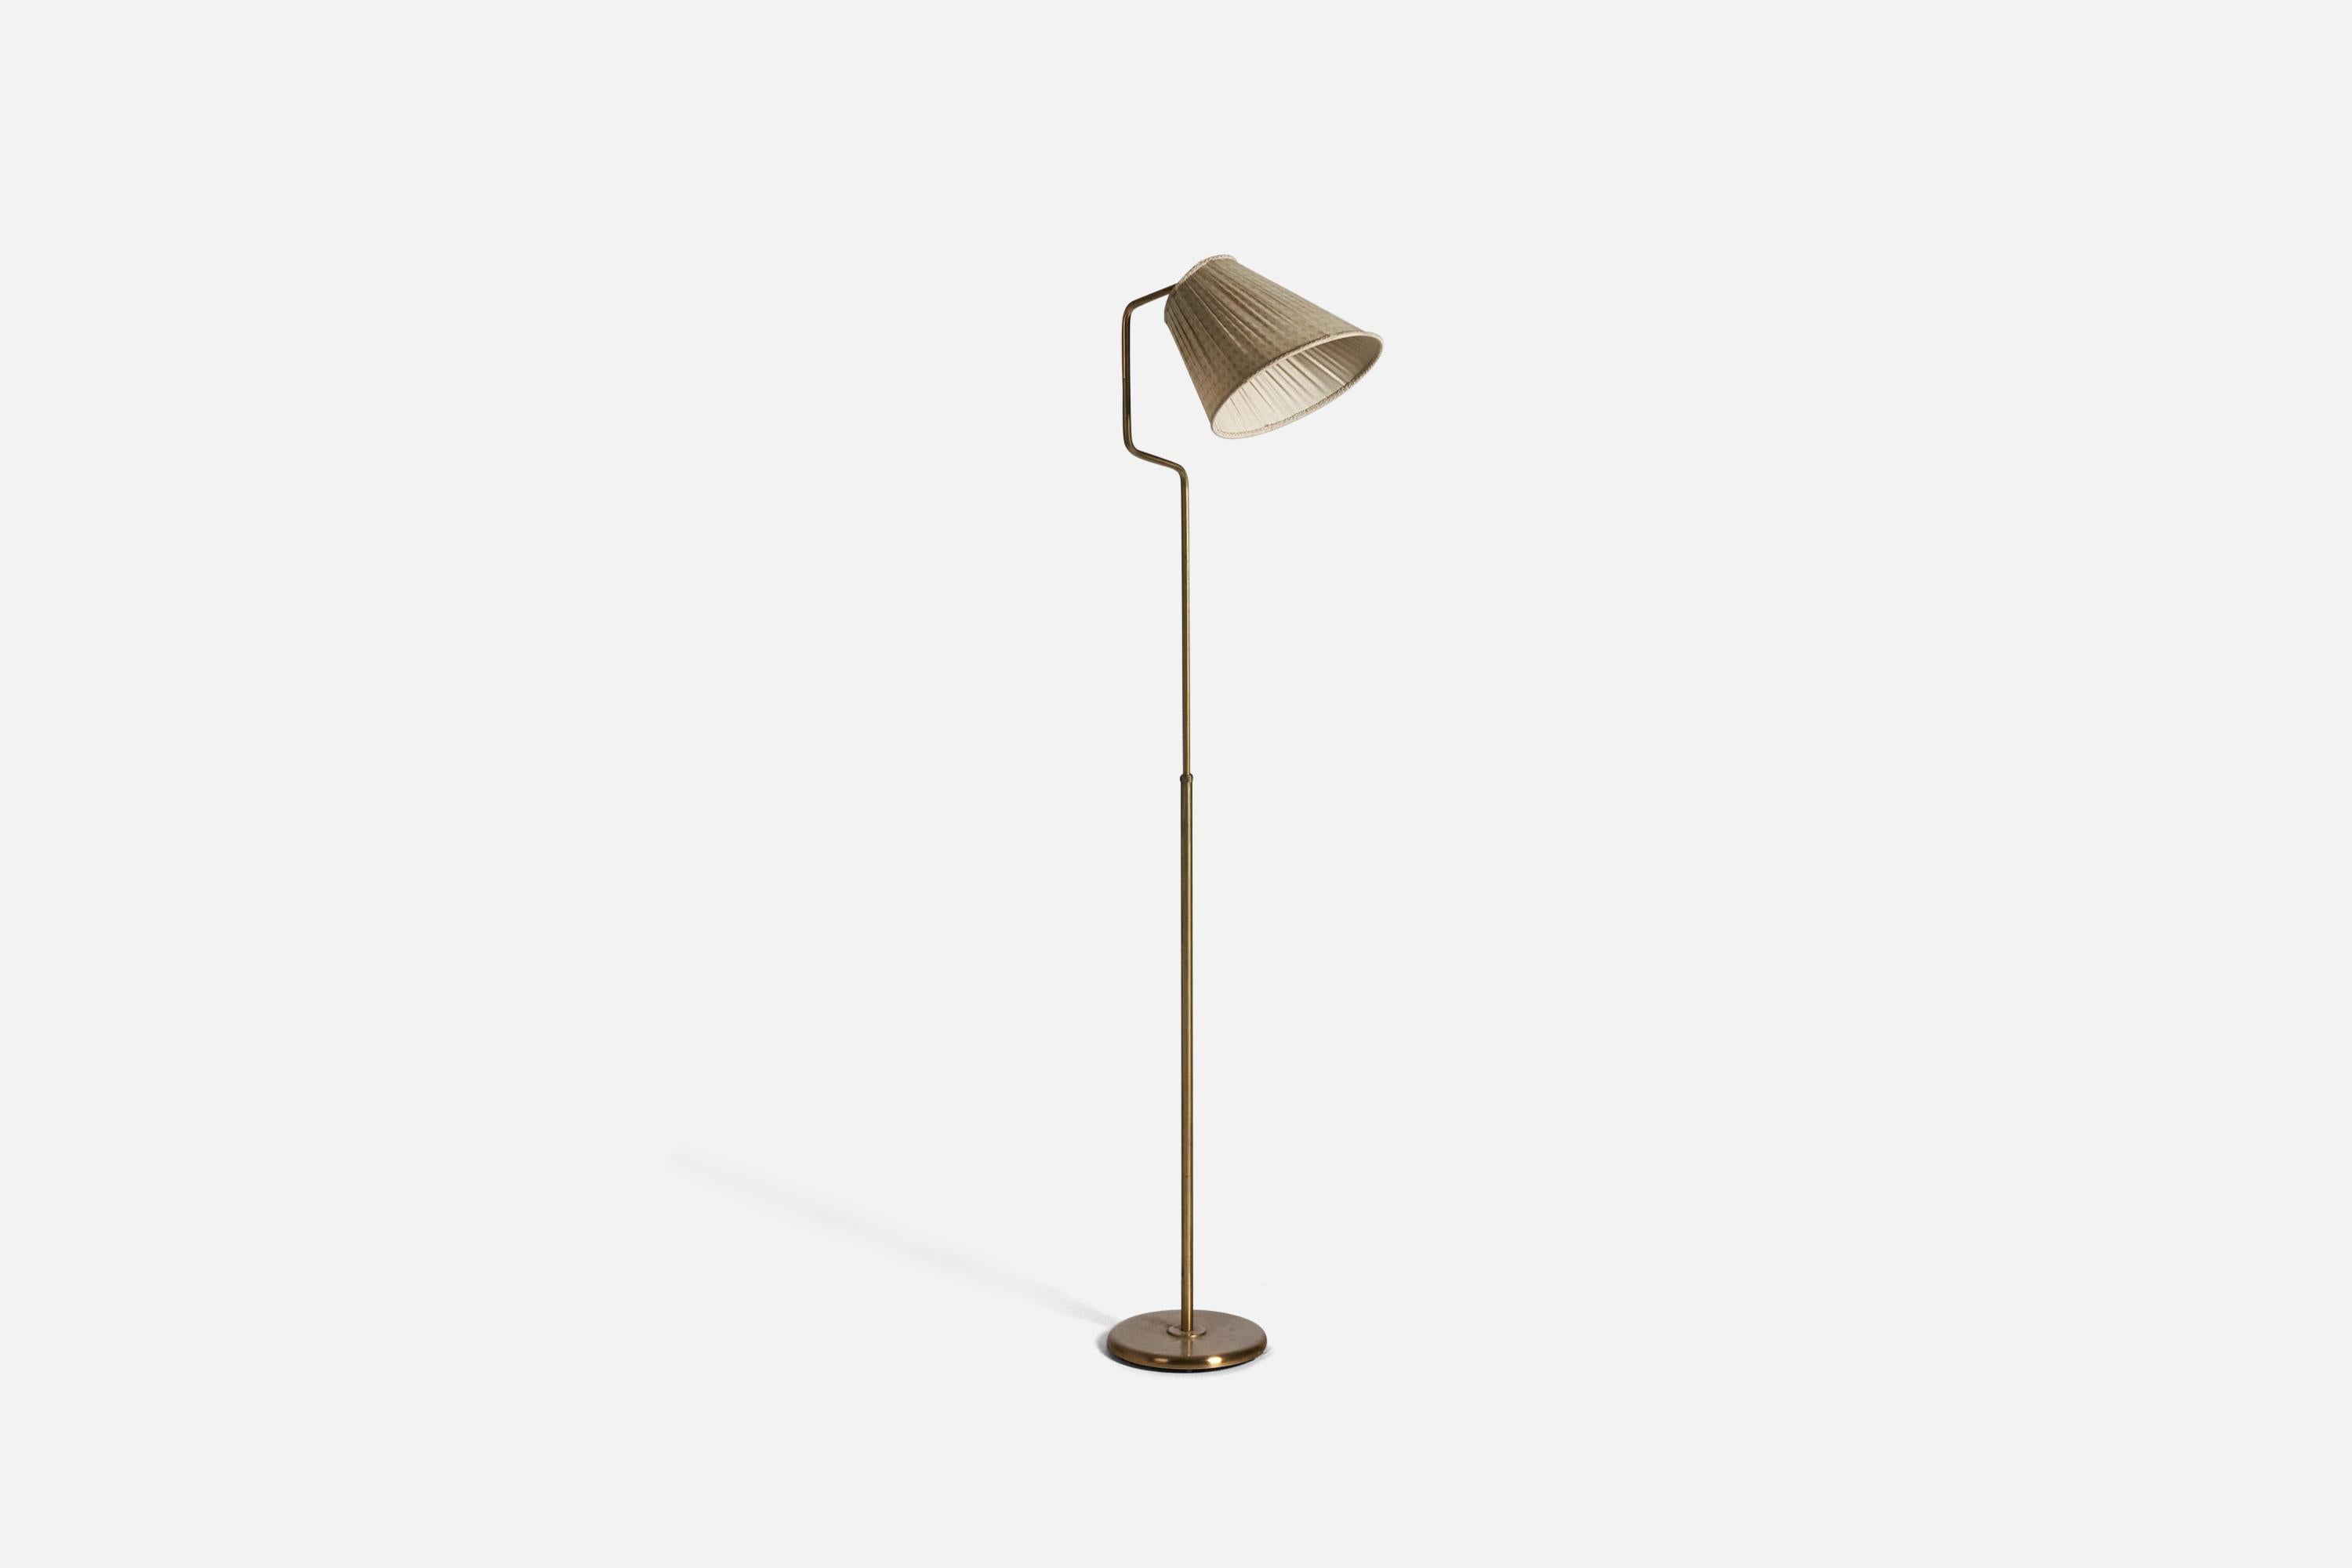 An adjustable, brass and white fabric floor lamp; design and production attributed to Böhlmarks, Sweden, 1940s. 

Variable dimensions, measured as illustrated in the first image.

Socket takes standard E-26 medium base bulb.
There is no maximum